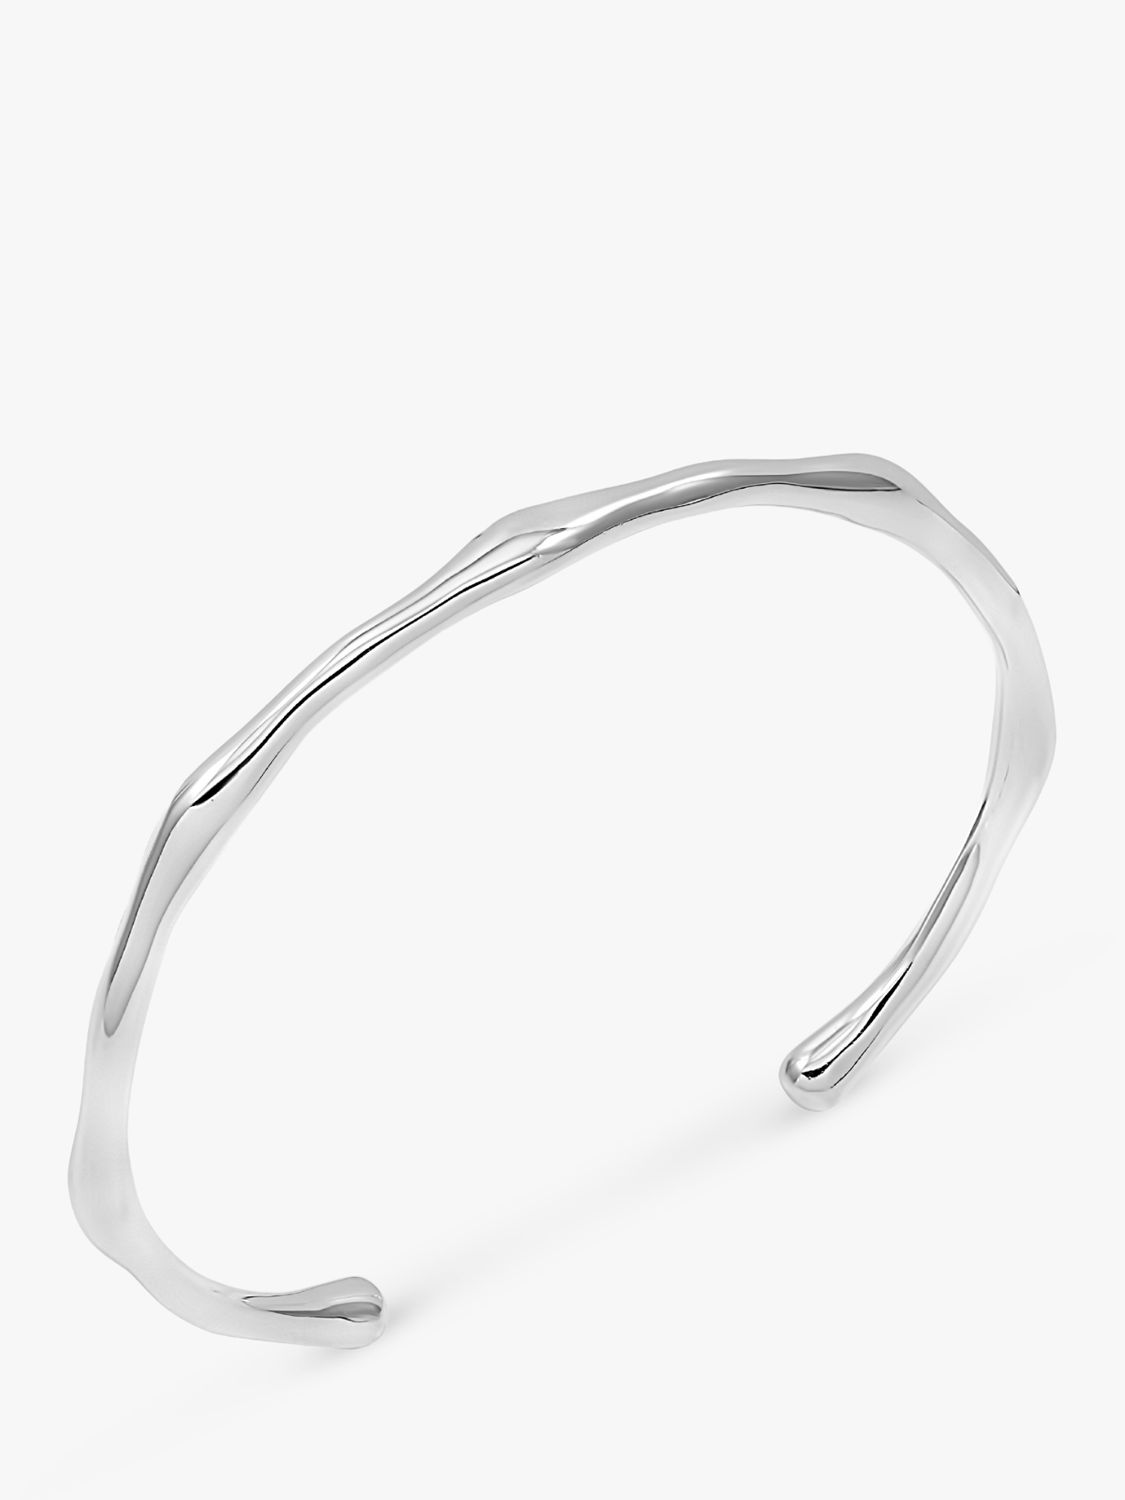 Buy Dower & Hall Waterfall Torque Bangle Online at johnlewis.com